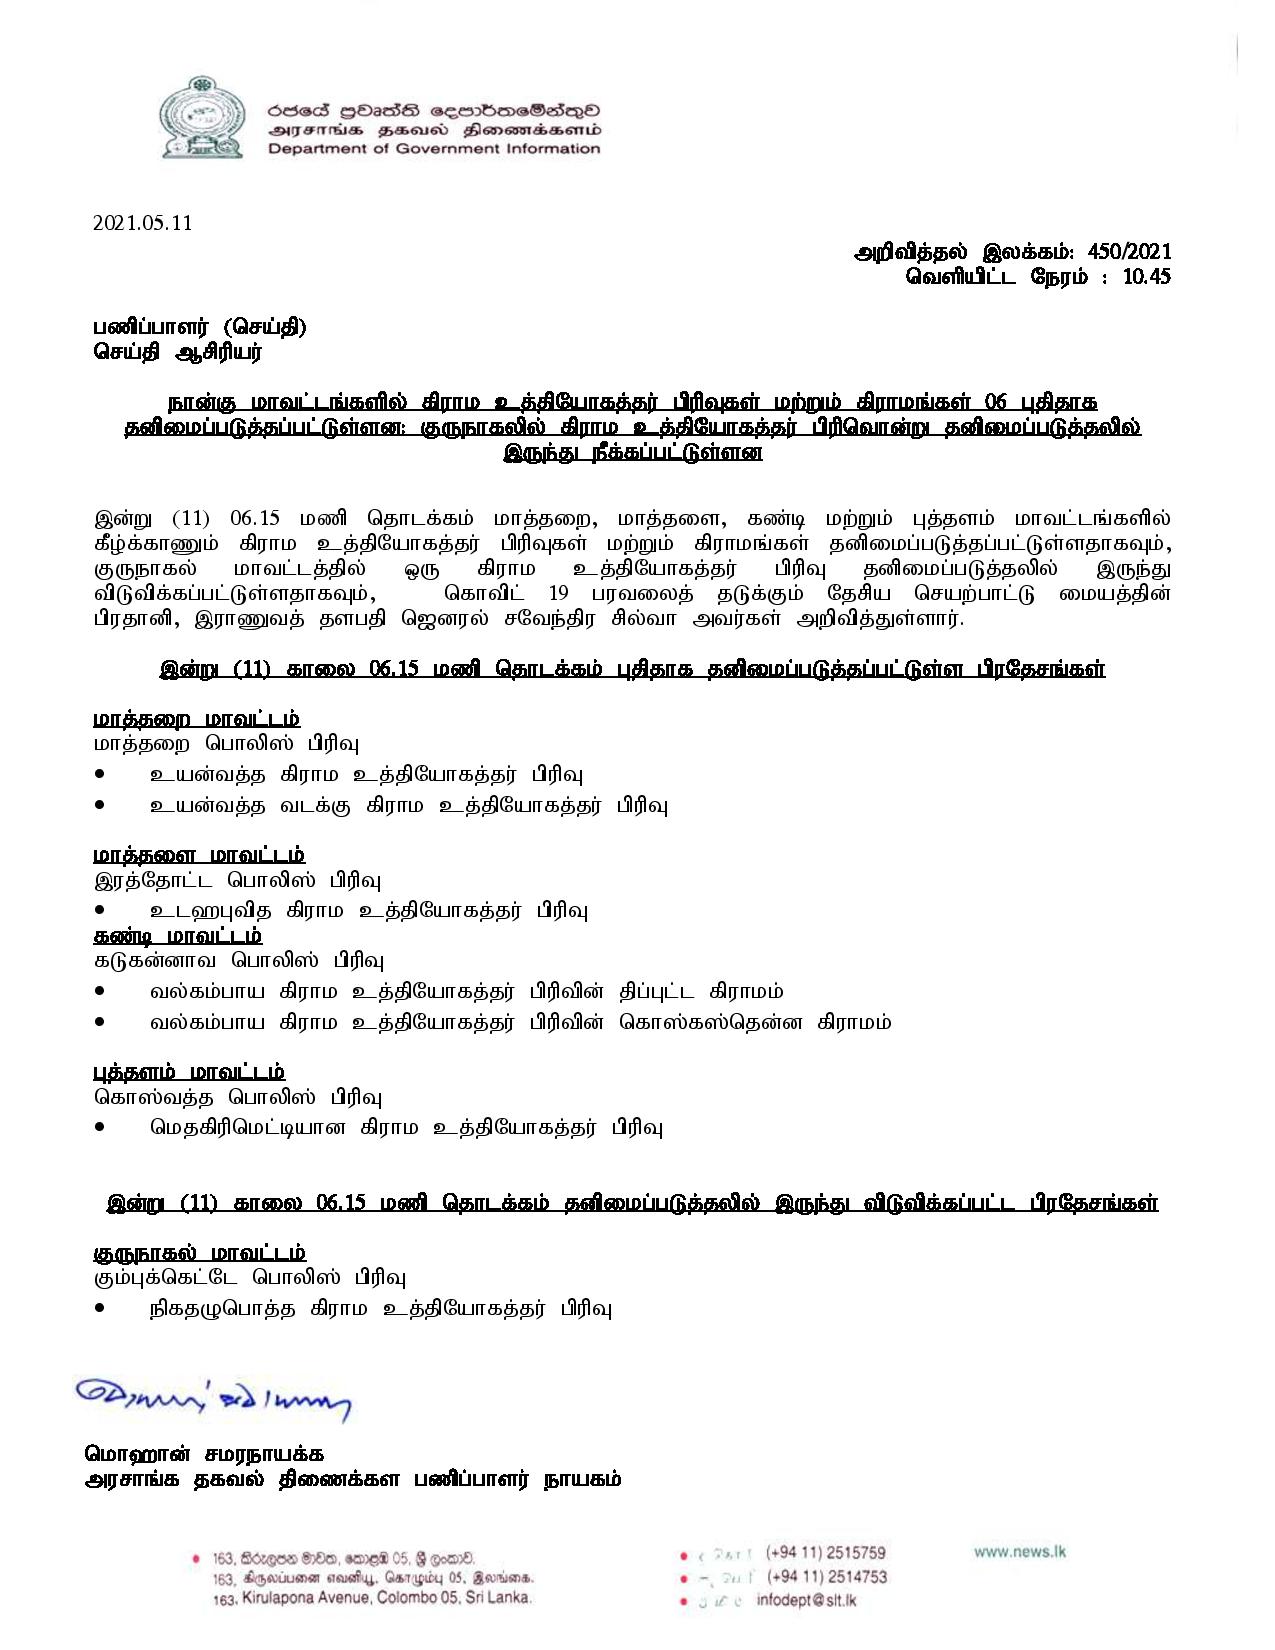 Press Release 450 Tamil page 001